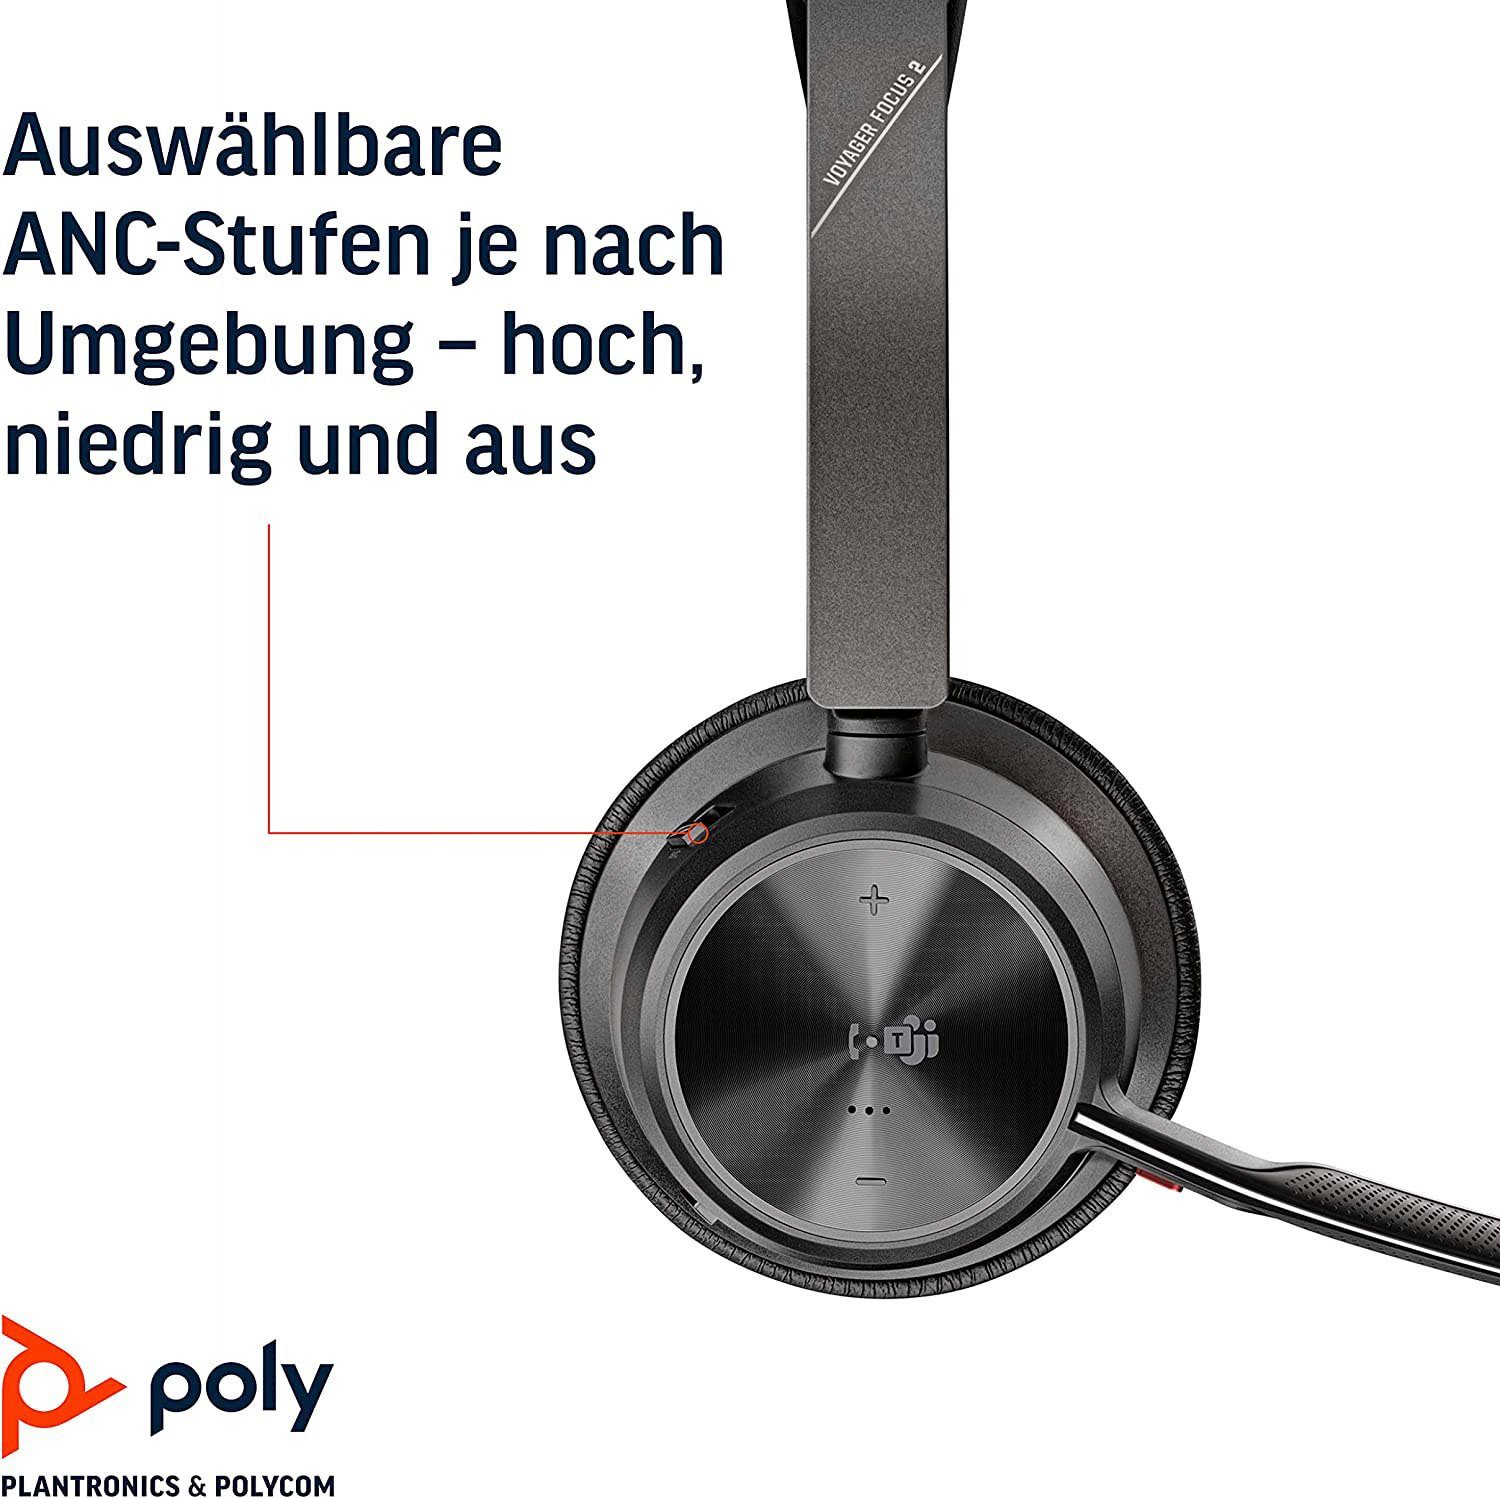 Distribution Noise Cancelling A2DP für (Audio Profile), Musik, 2 und Bluetooth HSP) HFP, UC Voyager Focus Bluetooth Poly (Active Video (Advanced Audio Profile), (ANC), Steuerung Remote Anrufe Wireless-Headset AVRCP Control integrierte